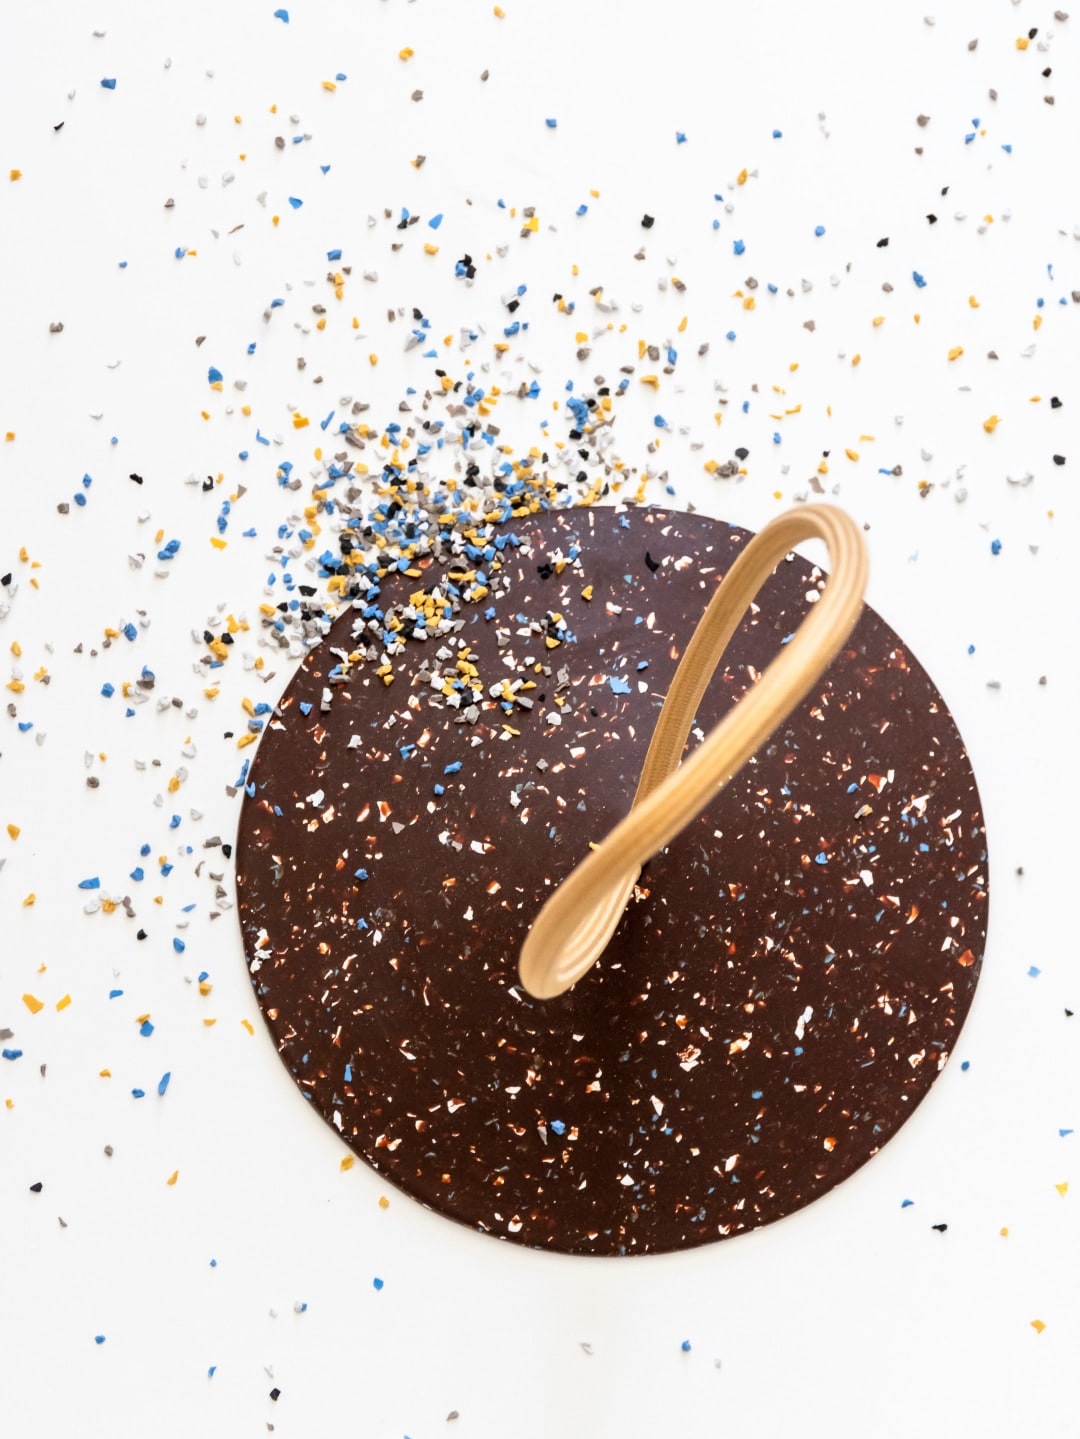 A STOP – Doorstop with confetti and a wooden spoon.